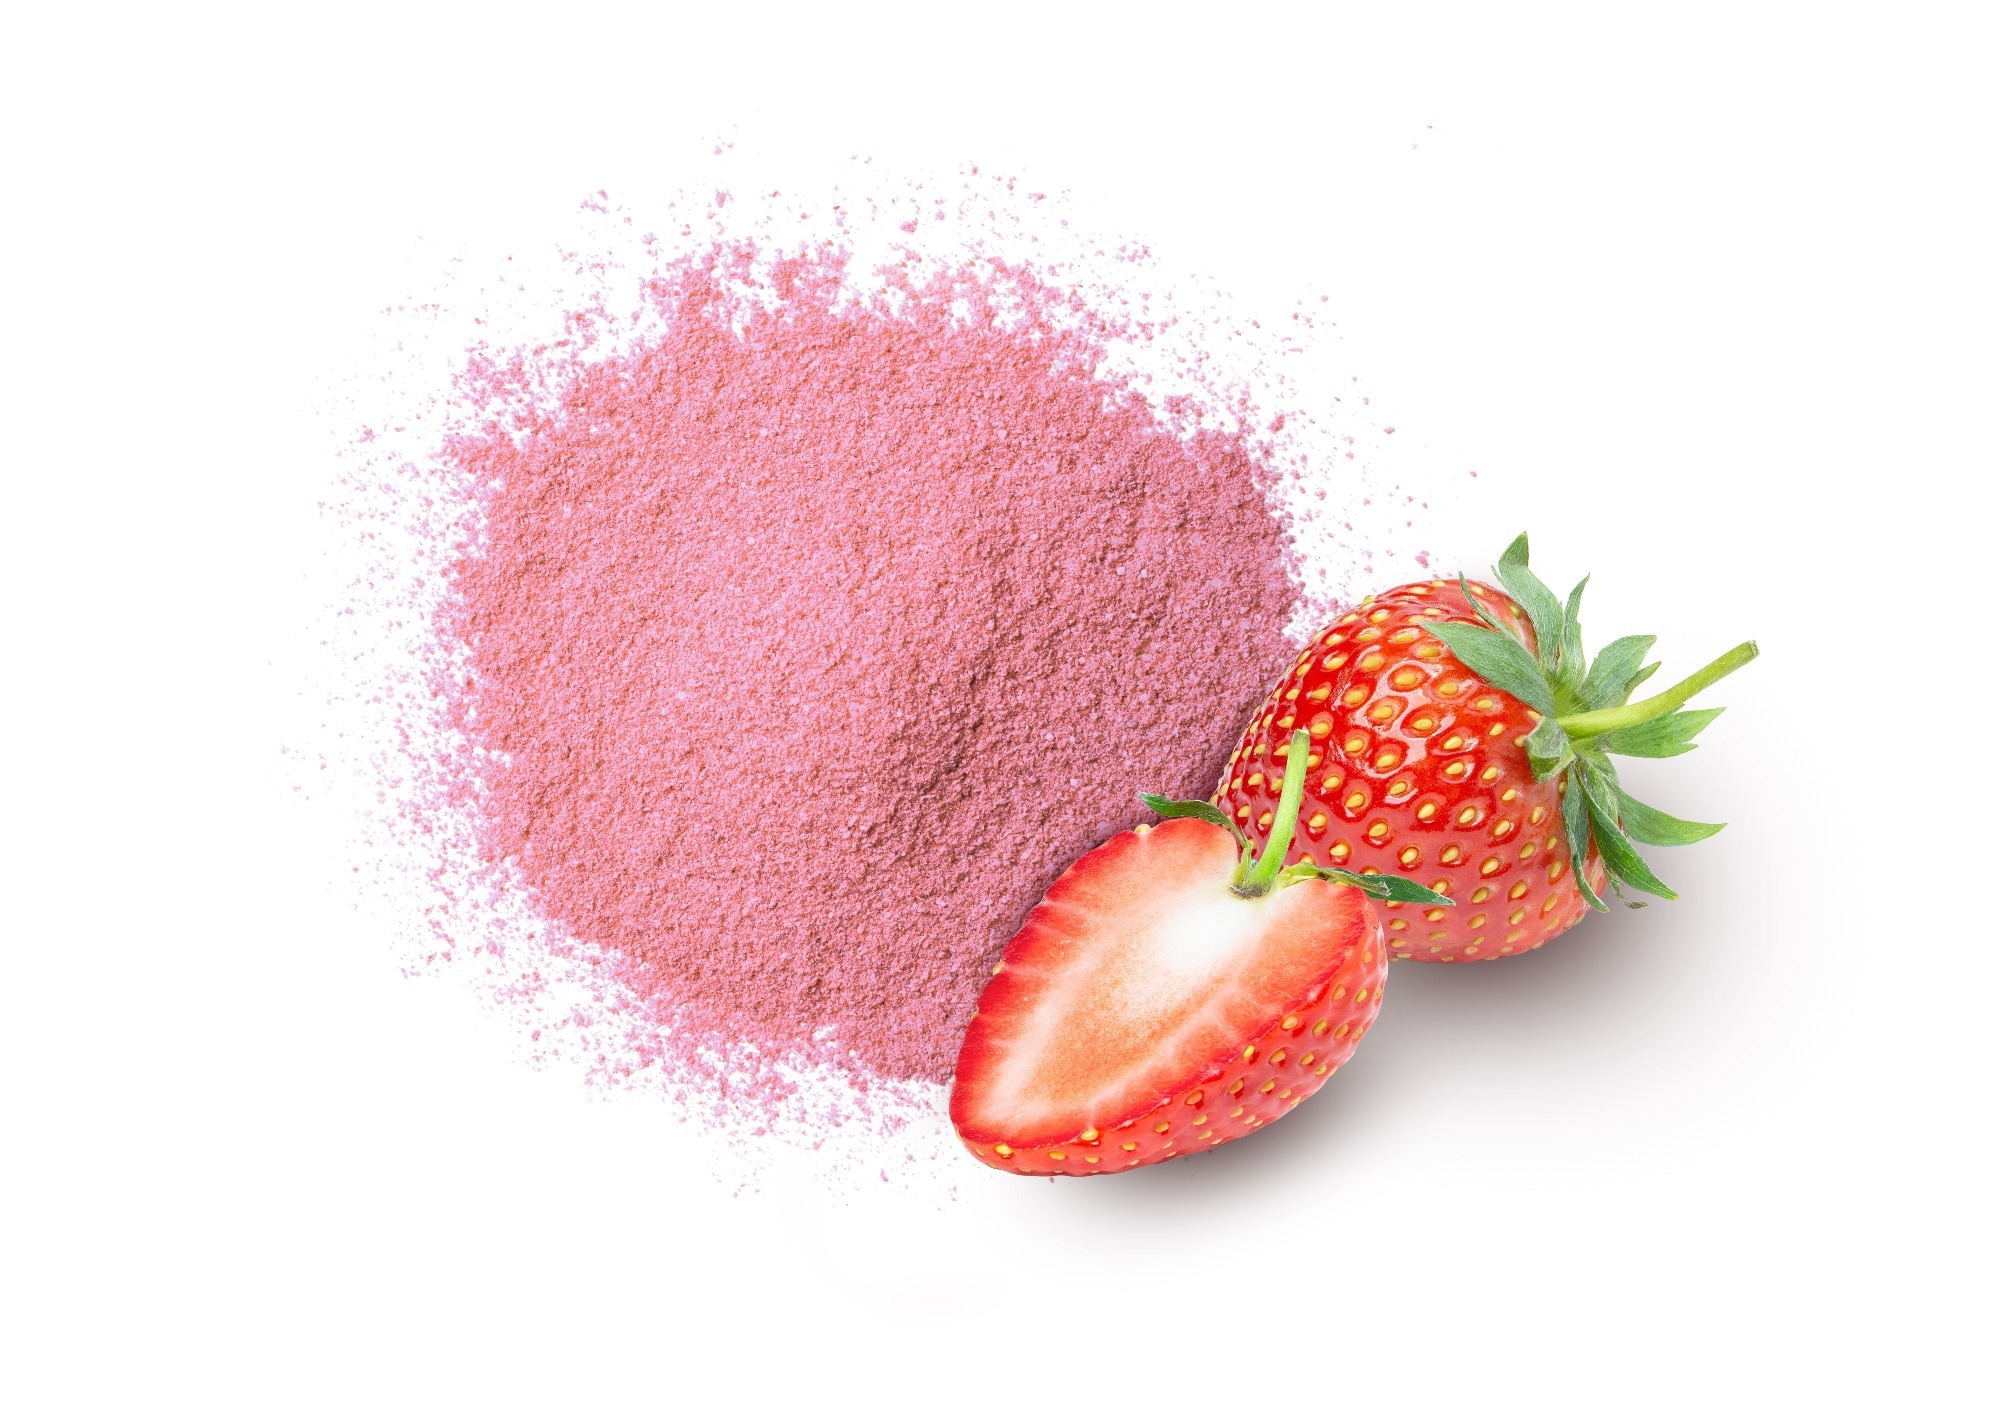 Study: Early Intervention in Cognitive Aging with Strawberry Supplementation. Image Credit: NIKCOA/Shutterstock.com